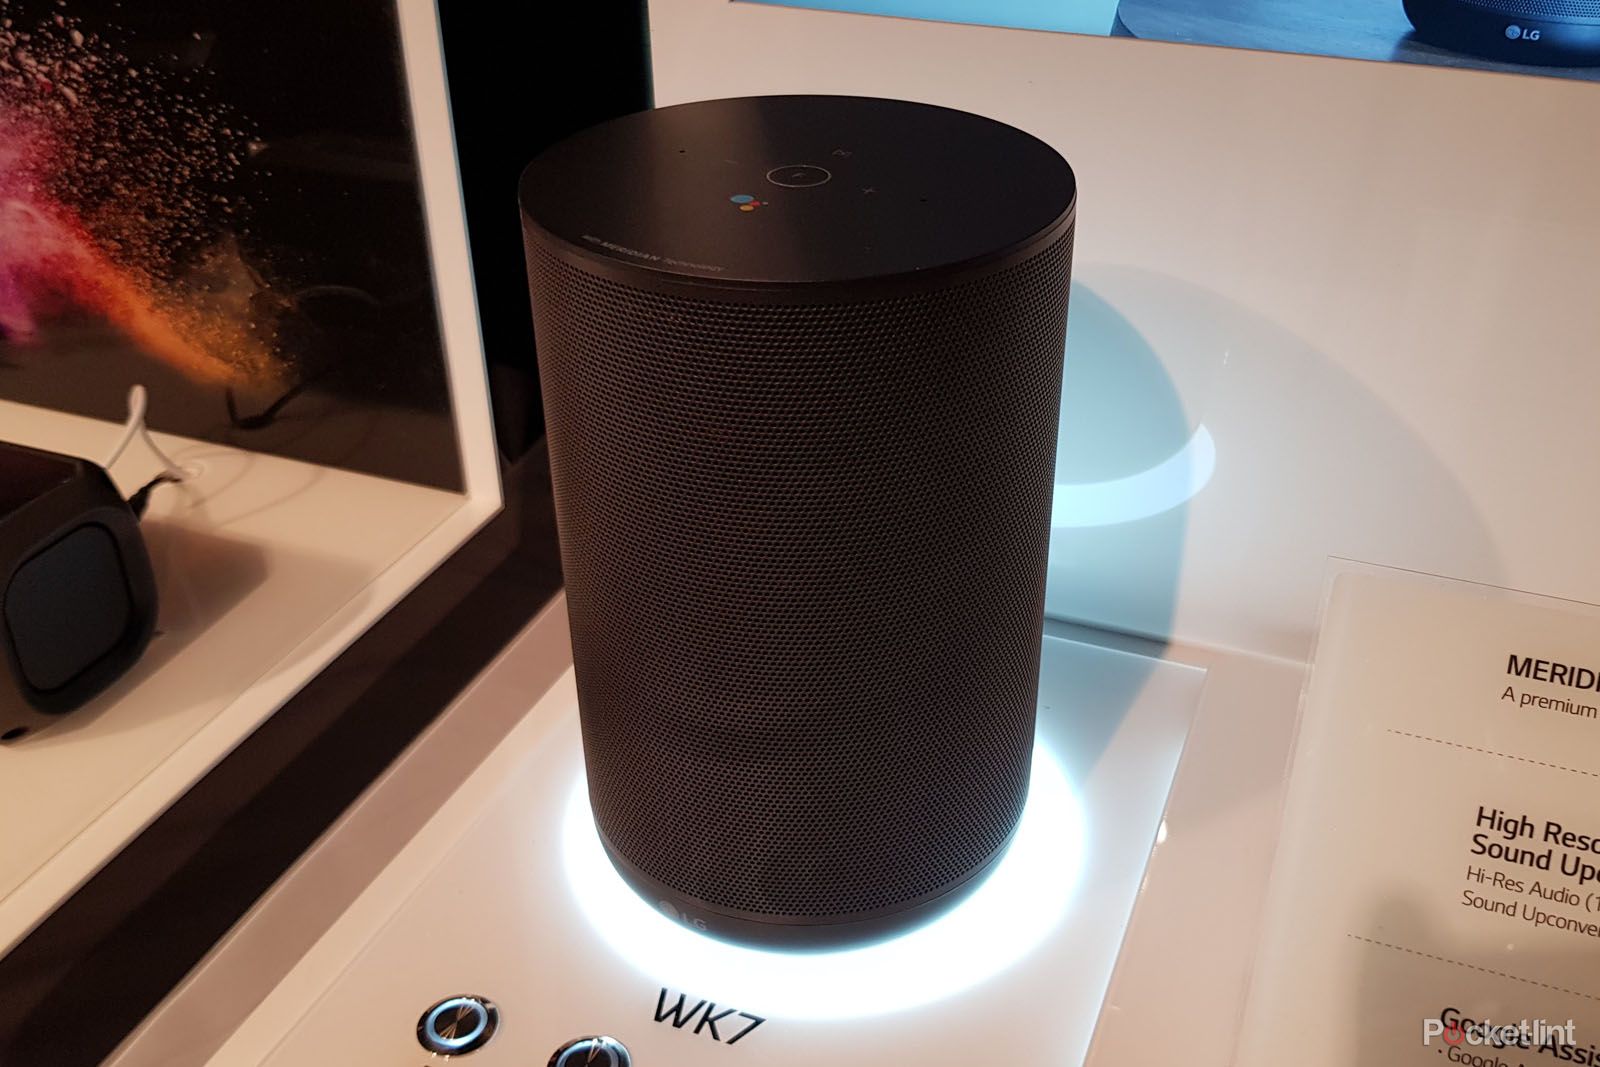 LG WK7 ThinQ speaker review image 1